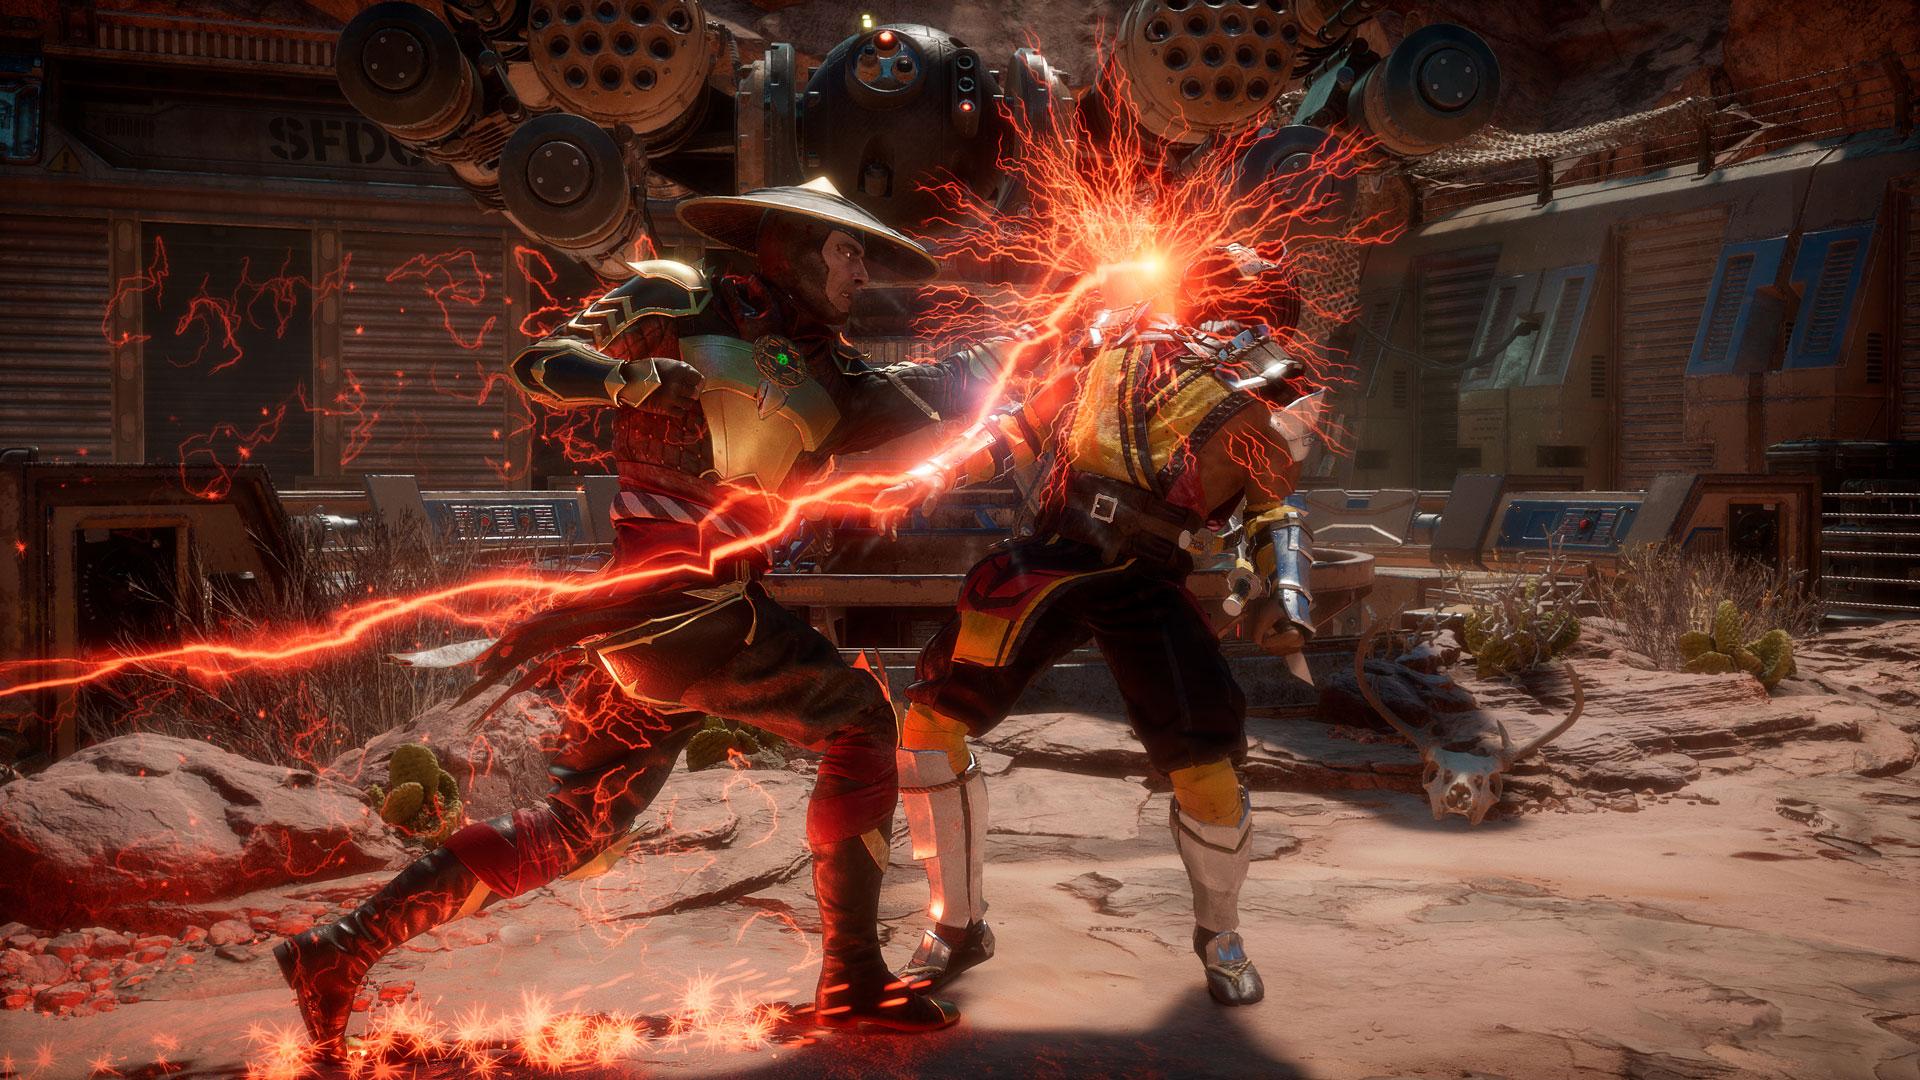 Mortal Kombat 11 Switch Impressions Suggest Game is Running